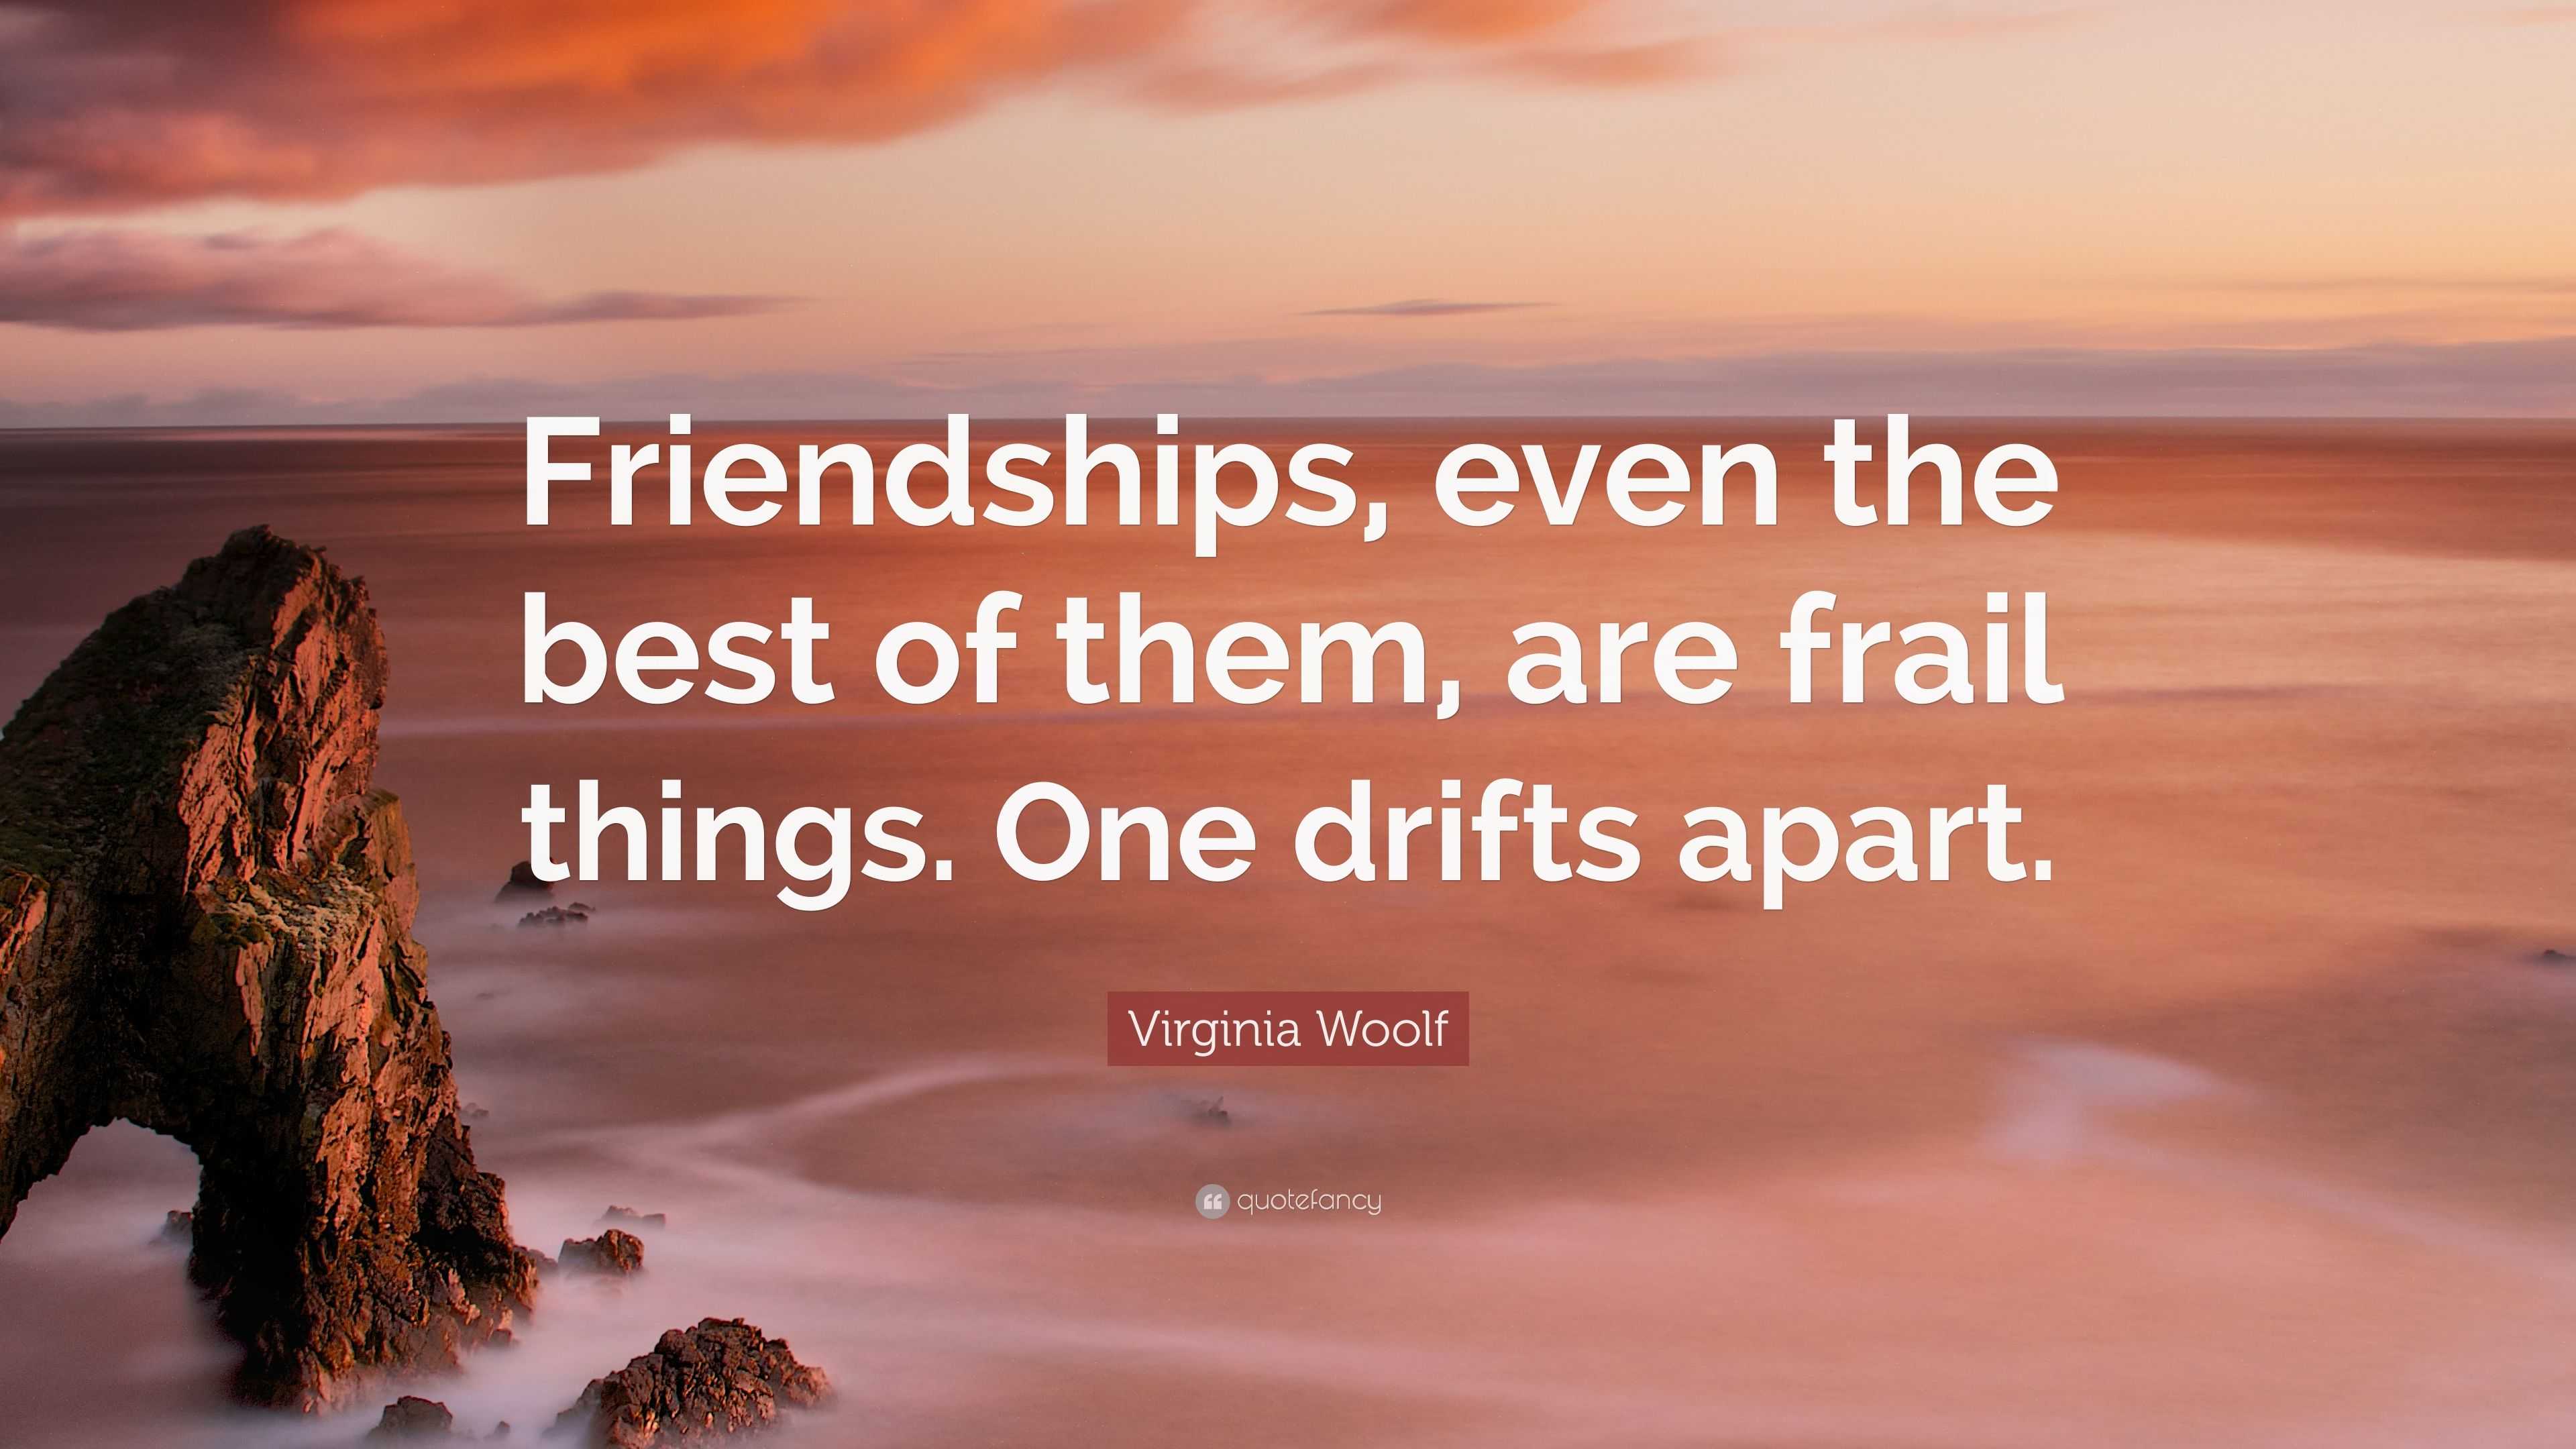 Virginia Woolf Quote: “Friendships, even the best of them, are frail